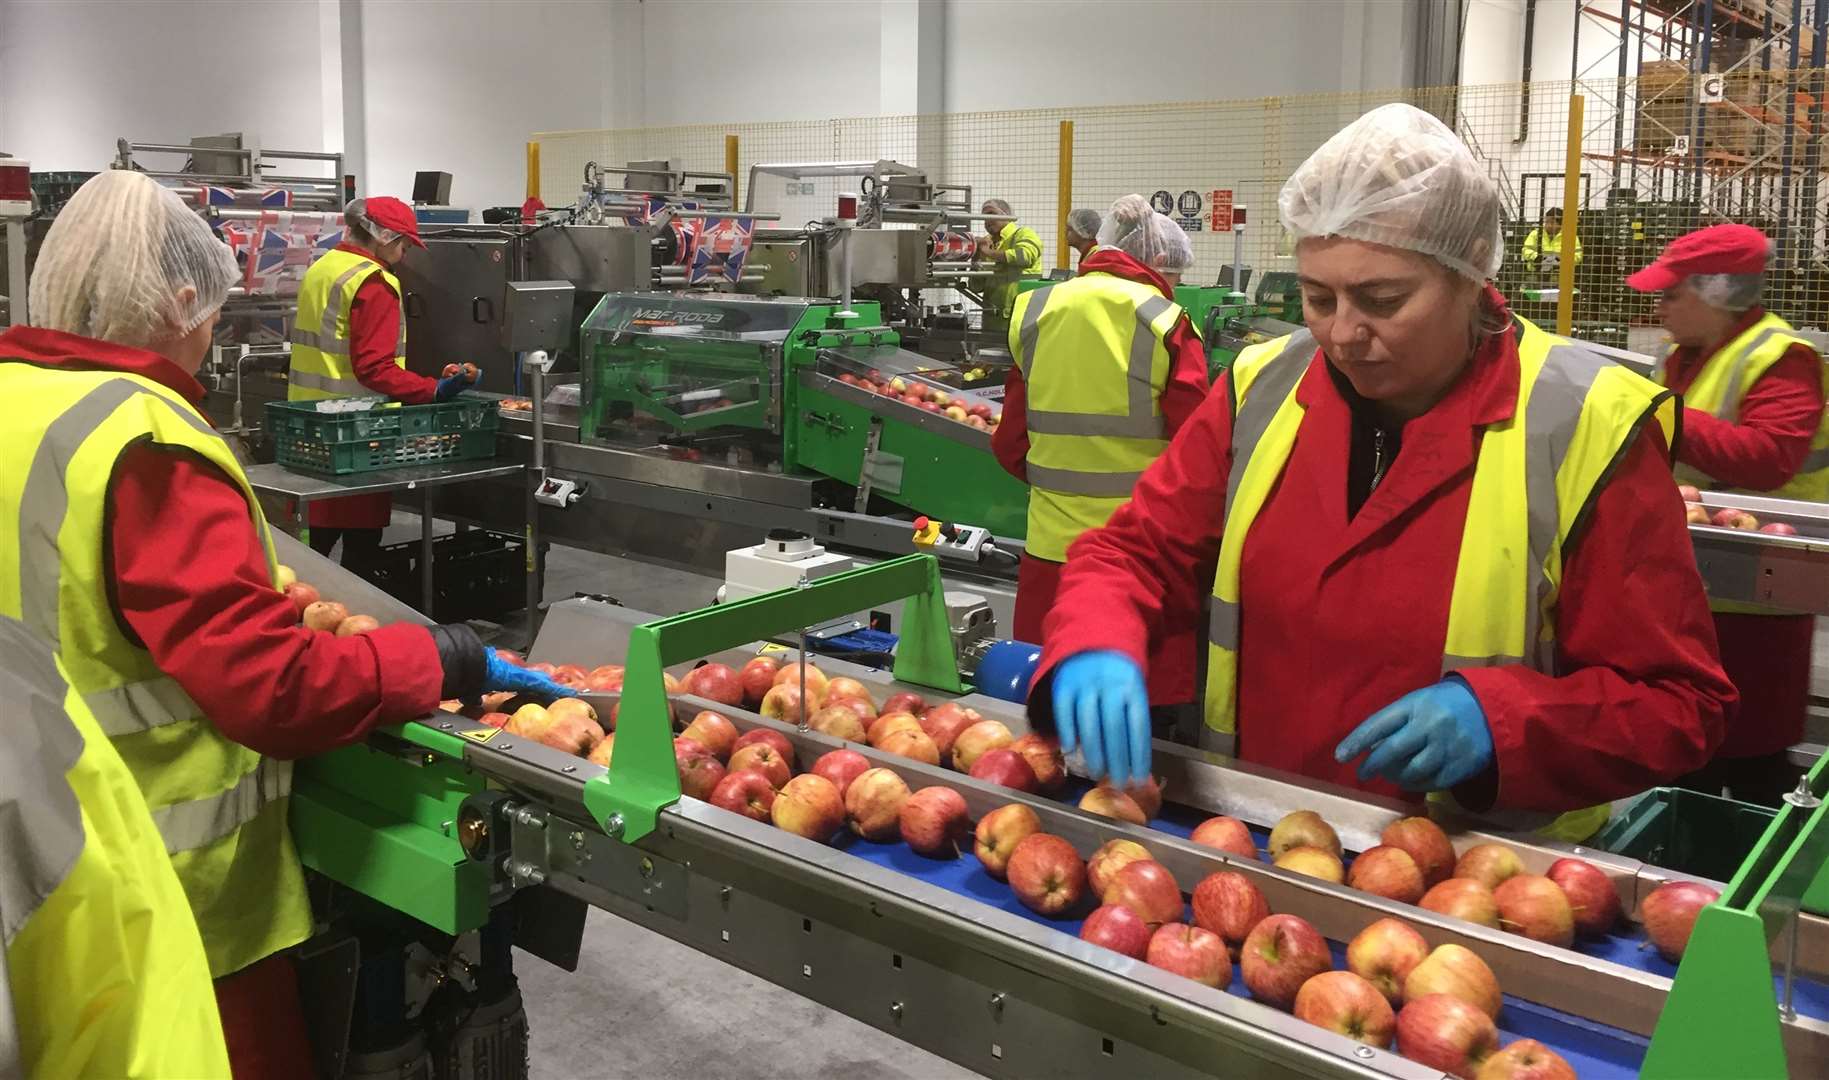 Technology plays a key role in the business and AC Goatham & Son are working to find ways to use the most modern, effective and efficient methods to enable them to grow, pick, store, pack and deliver quality British fruit.